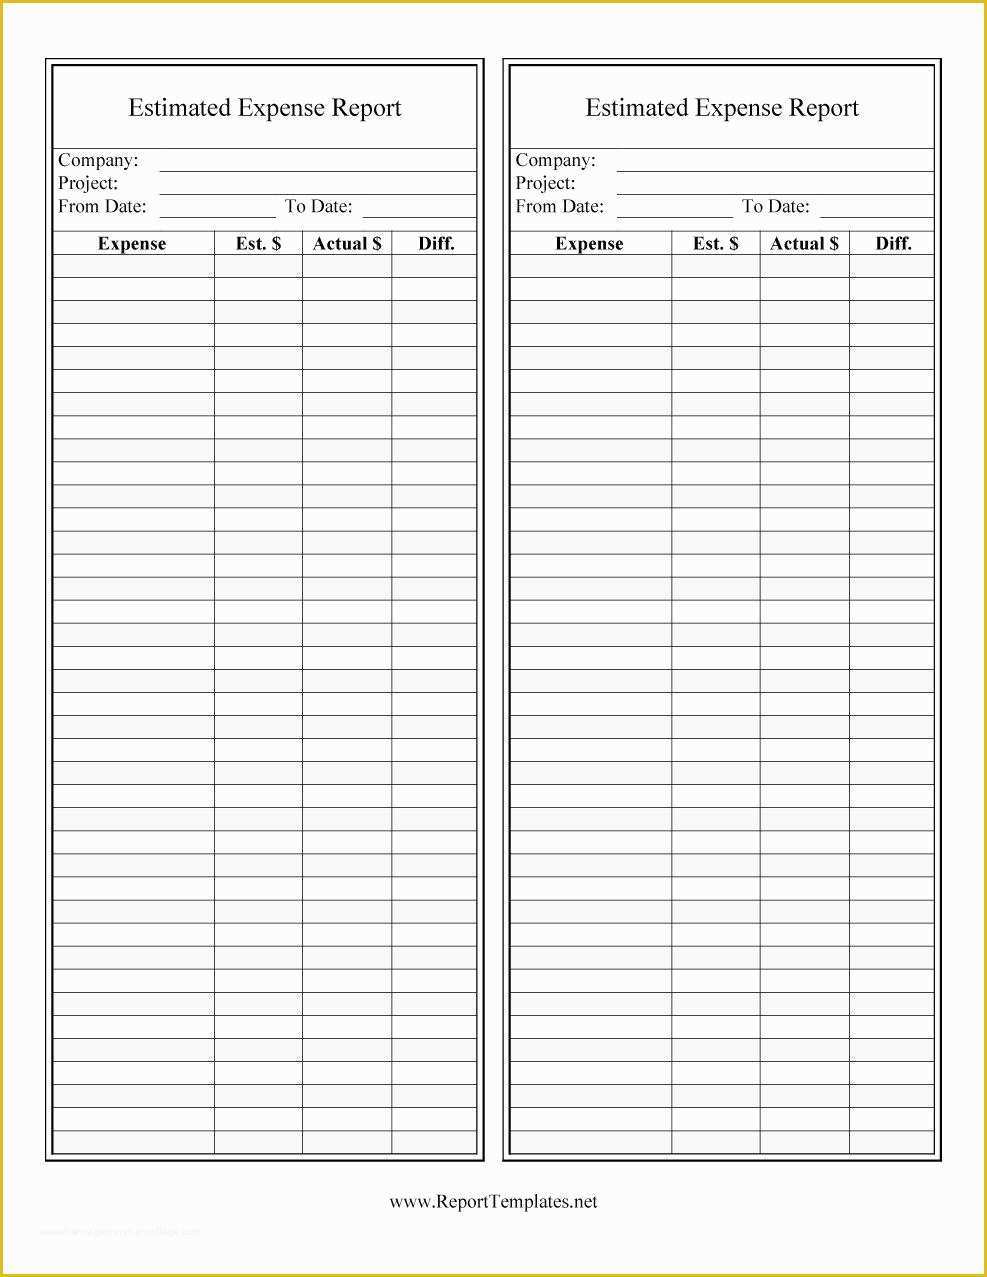 Free Report Templates Of 40 Expense Report Templates to Help You Save Money